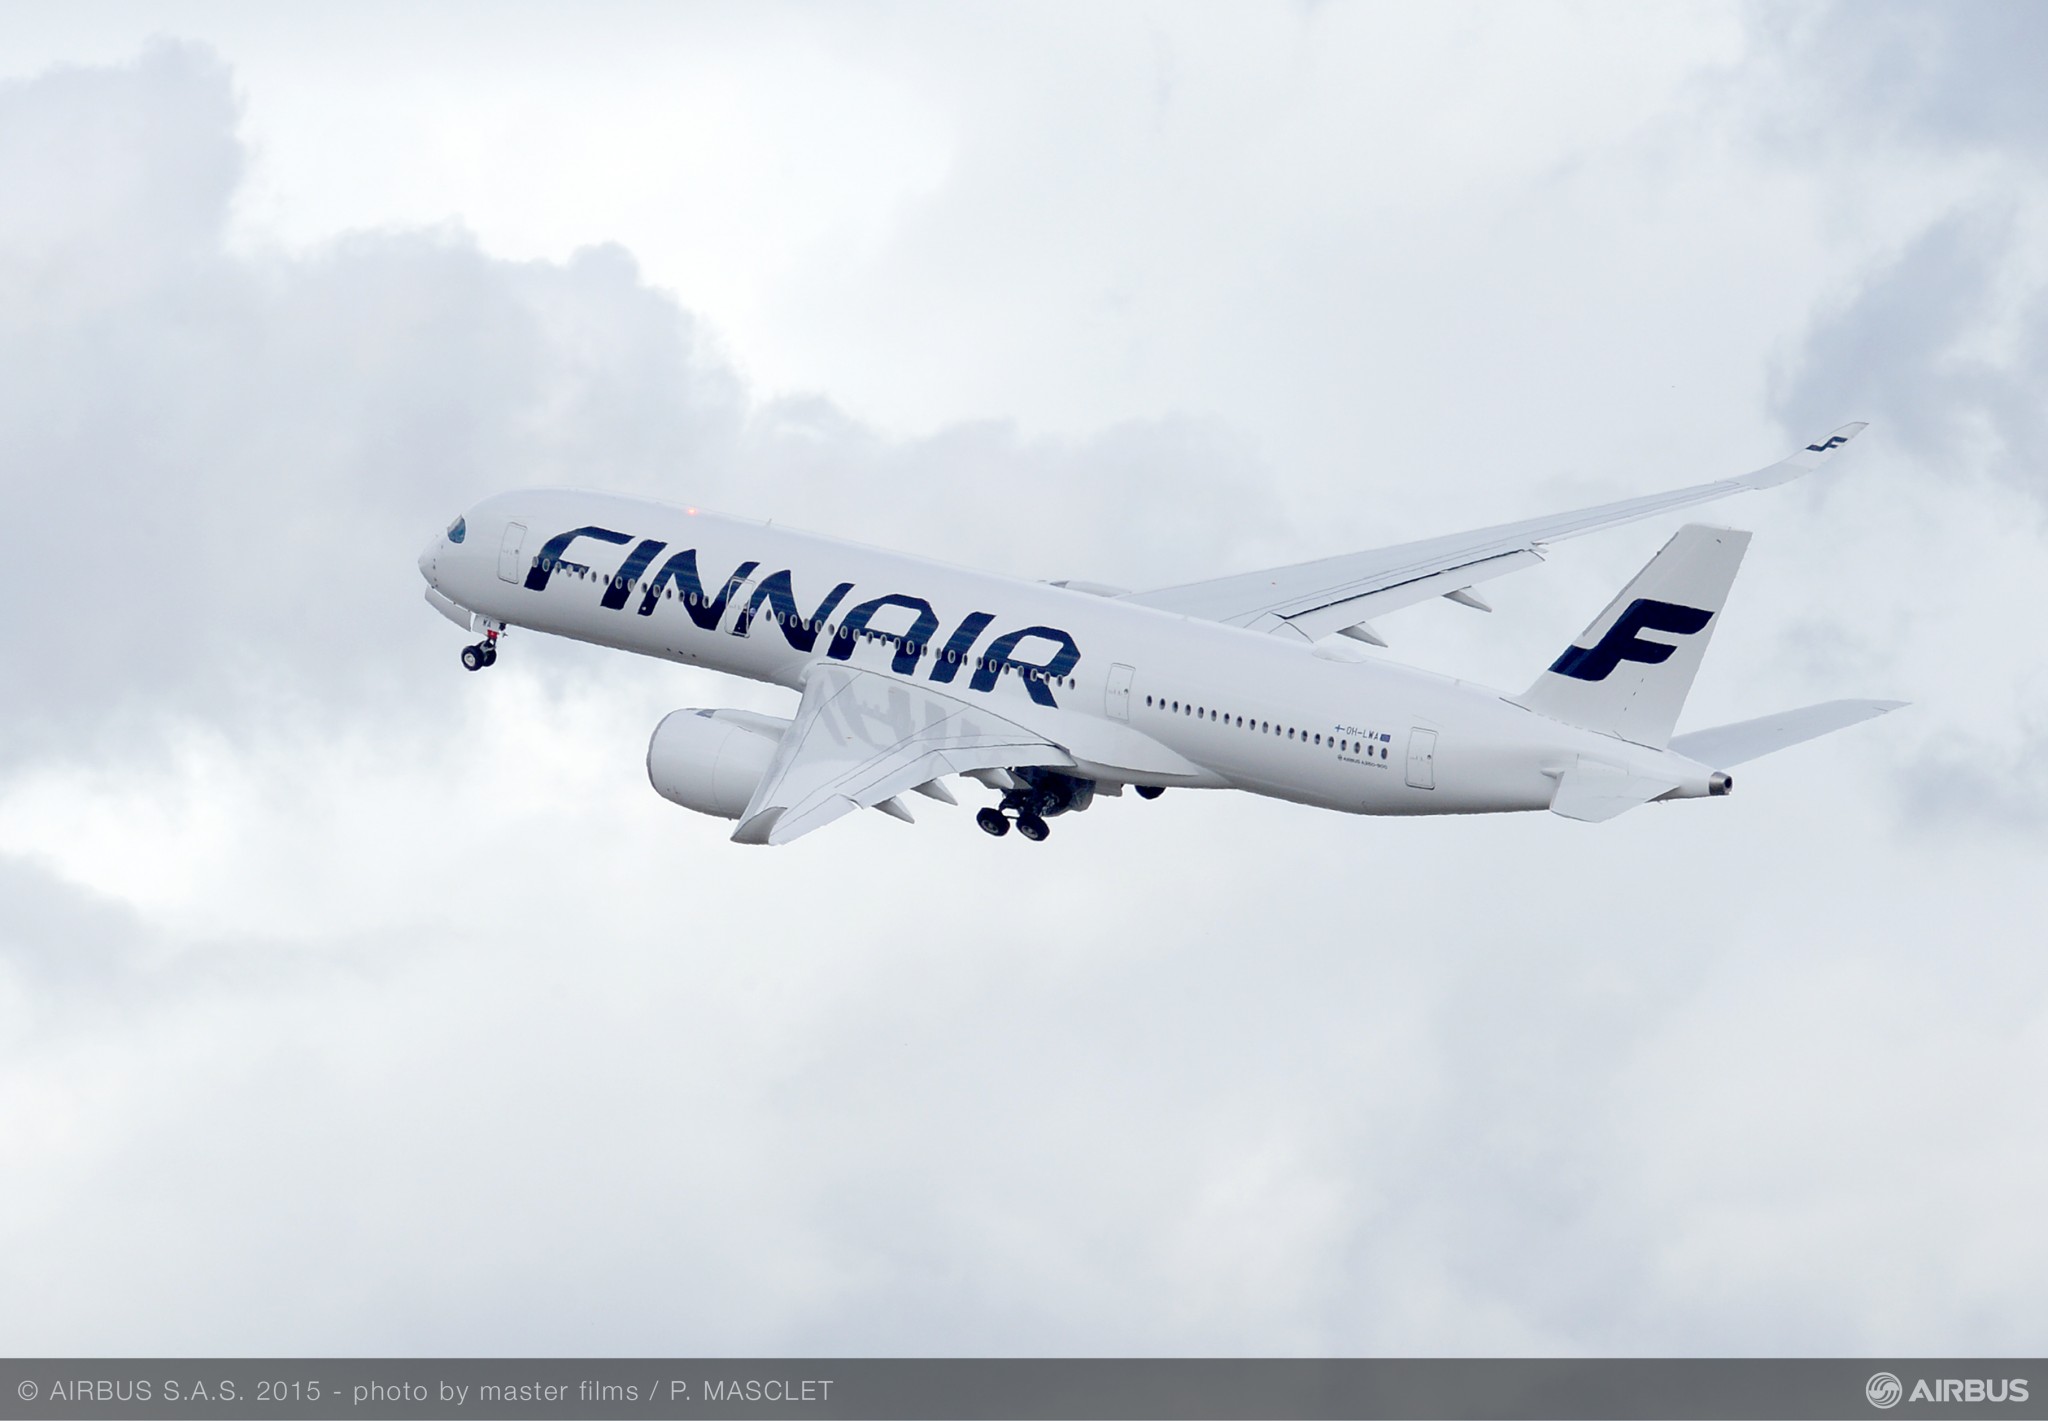 Finnair introduces new elevated cabin experience on 14 international routes